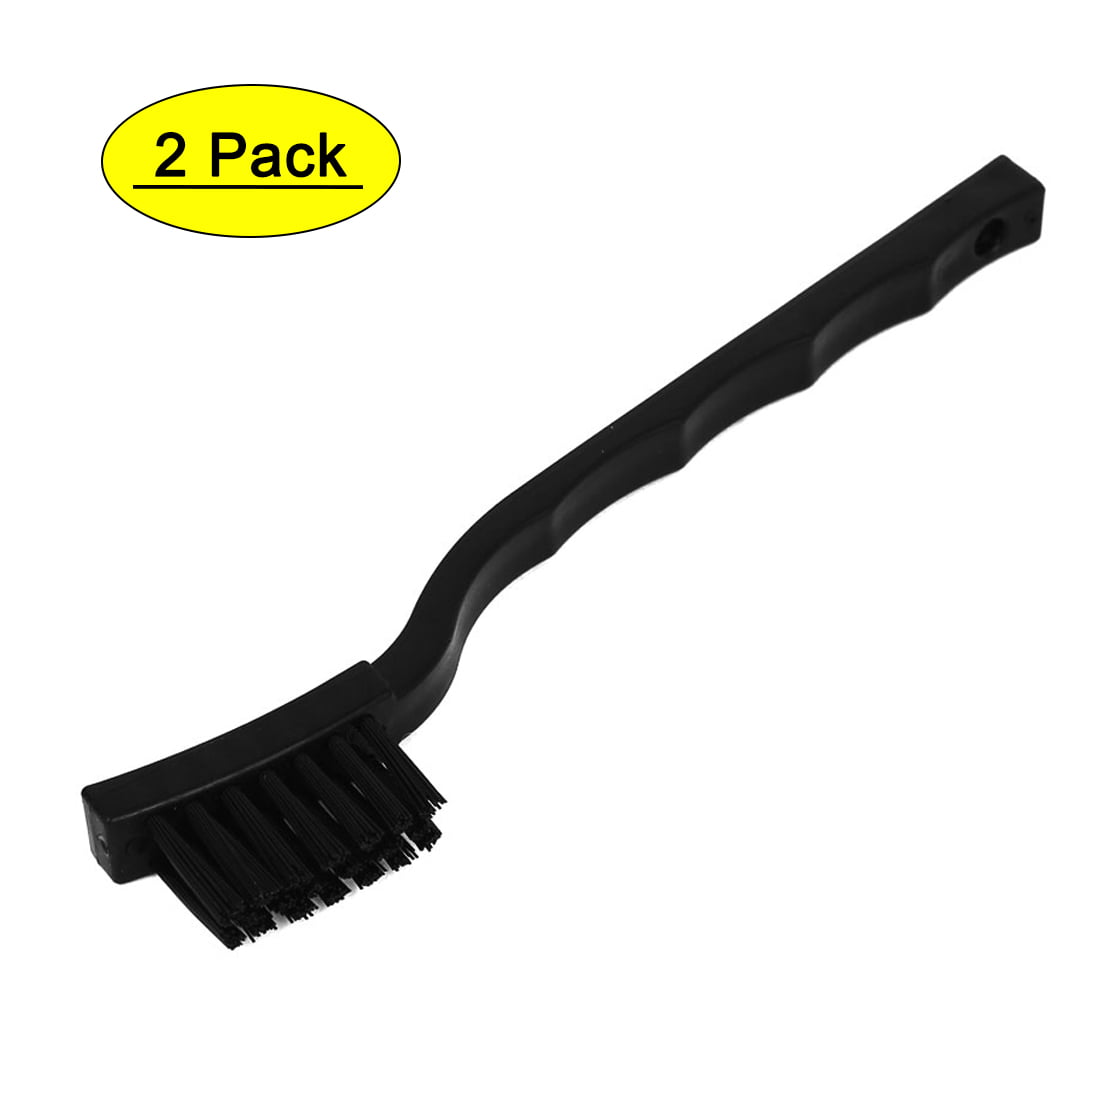 2 PCS Mainboard Cleaning Tools ESD Safety Dust Removal Brush for PCB for Cleaning Keyboard Anti‑Static Brush Mobile Phone Parts